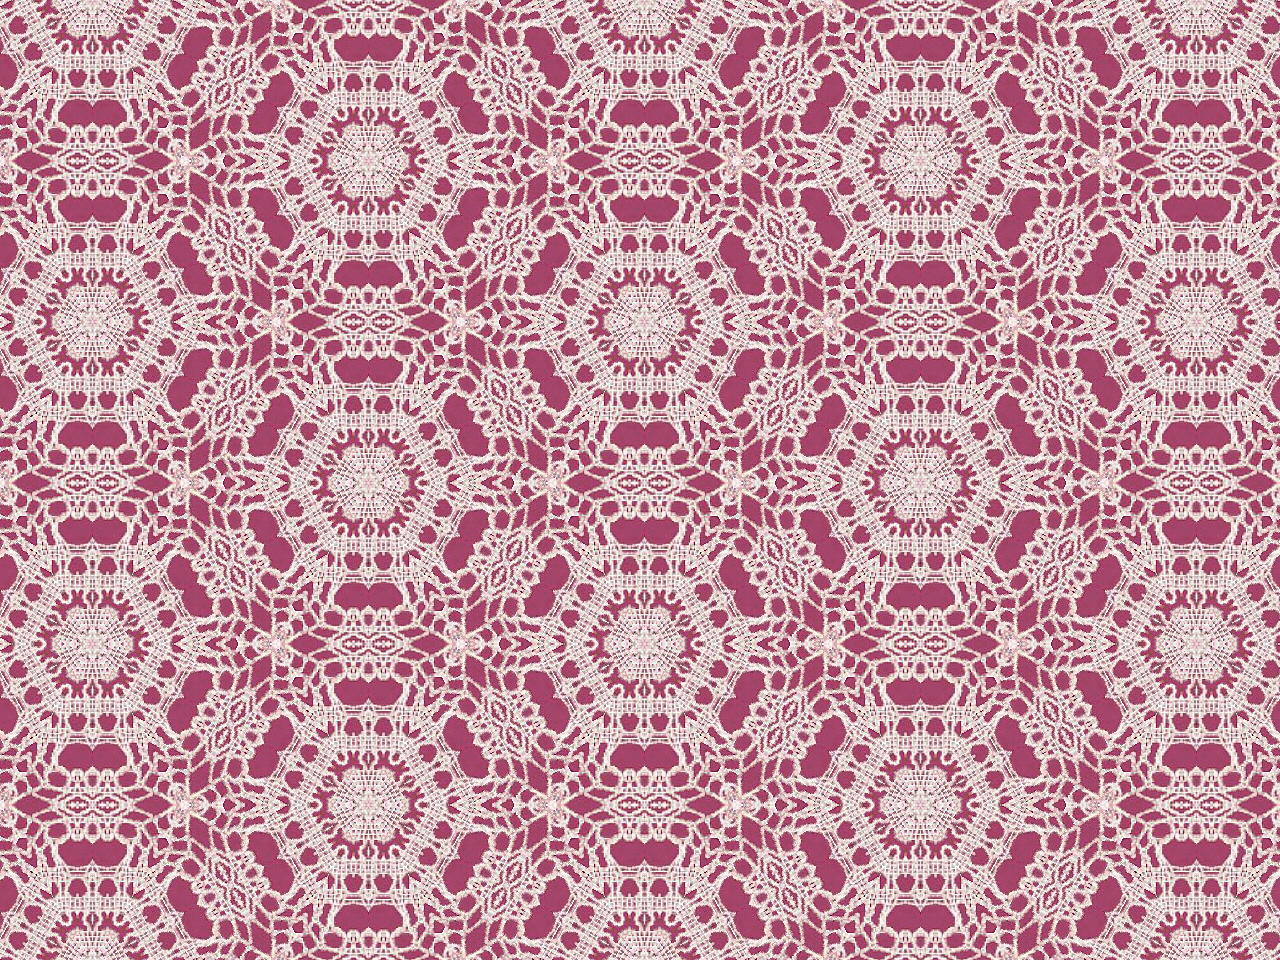 Artbyjean Image Of Lace Vintage White Over Maroon